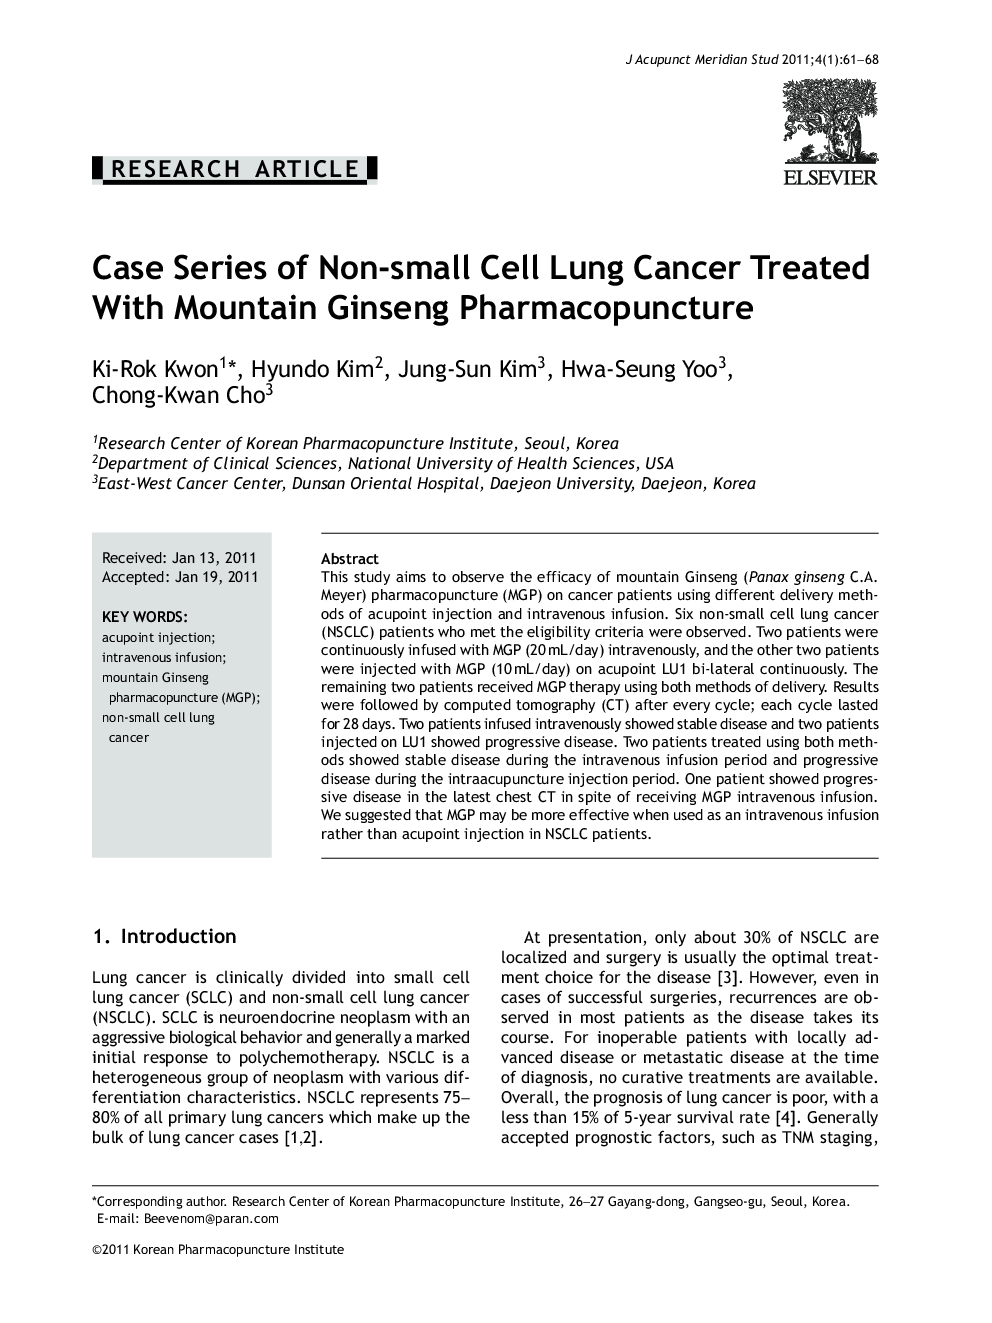 Case Series of Non-small Cell Lung Cancer Treated With Mountain Ginseng Pharmacopuncture